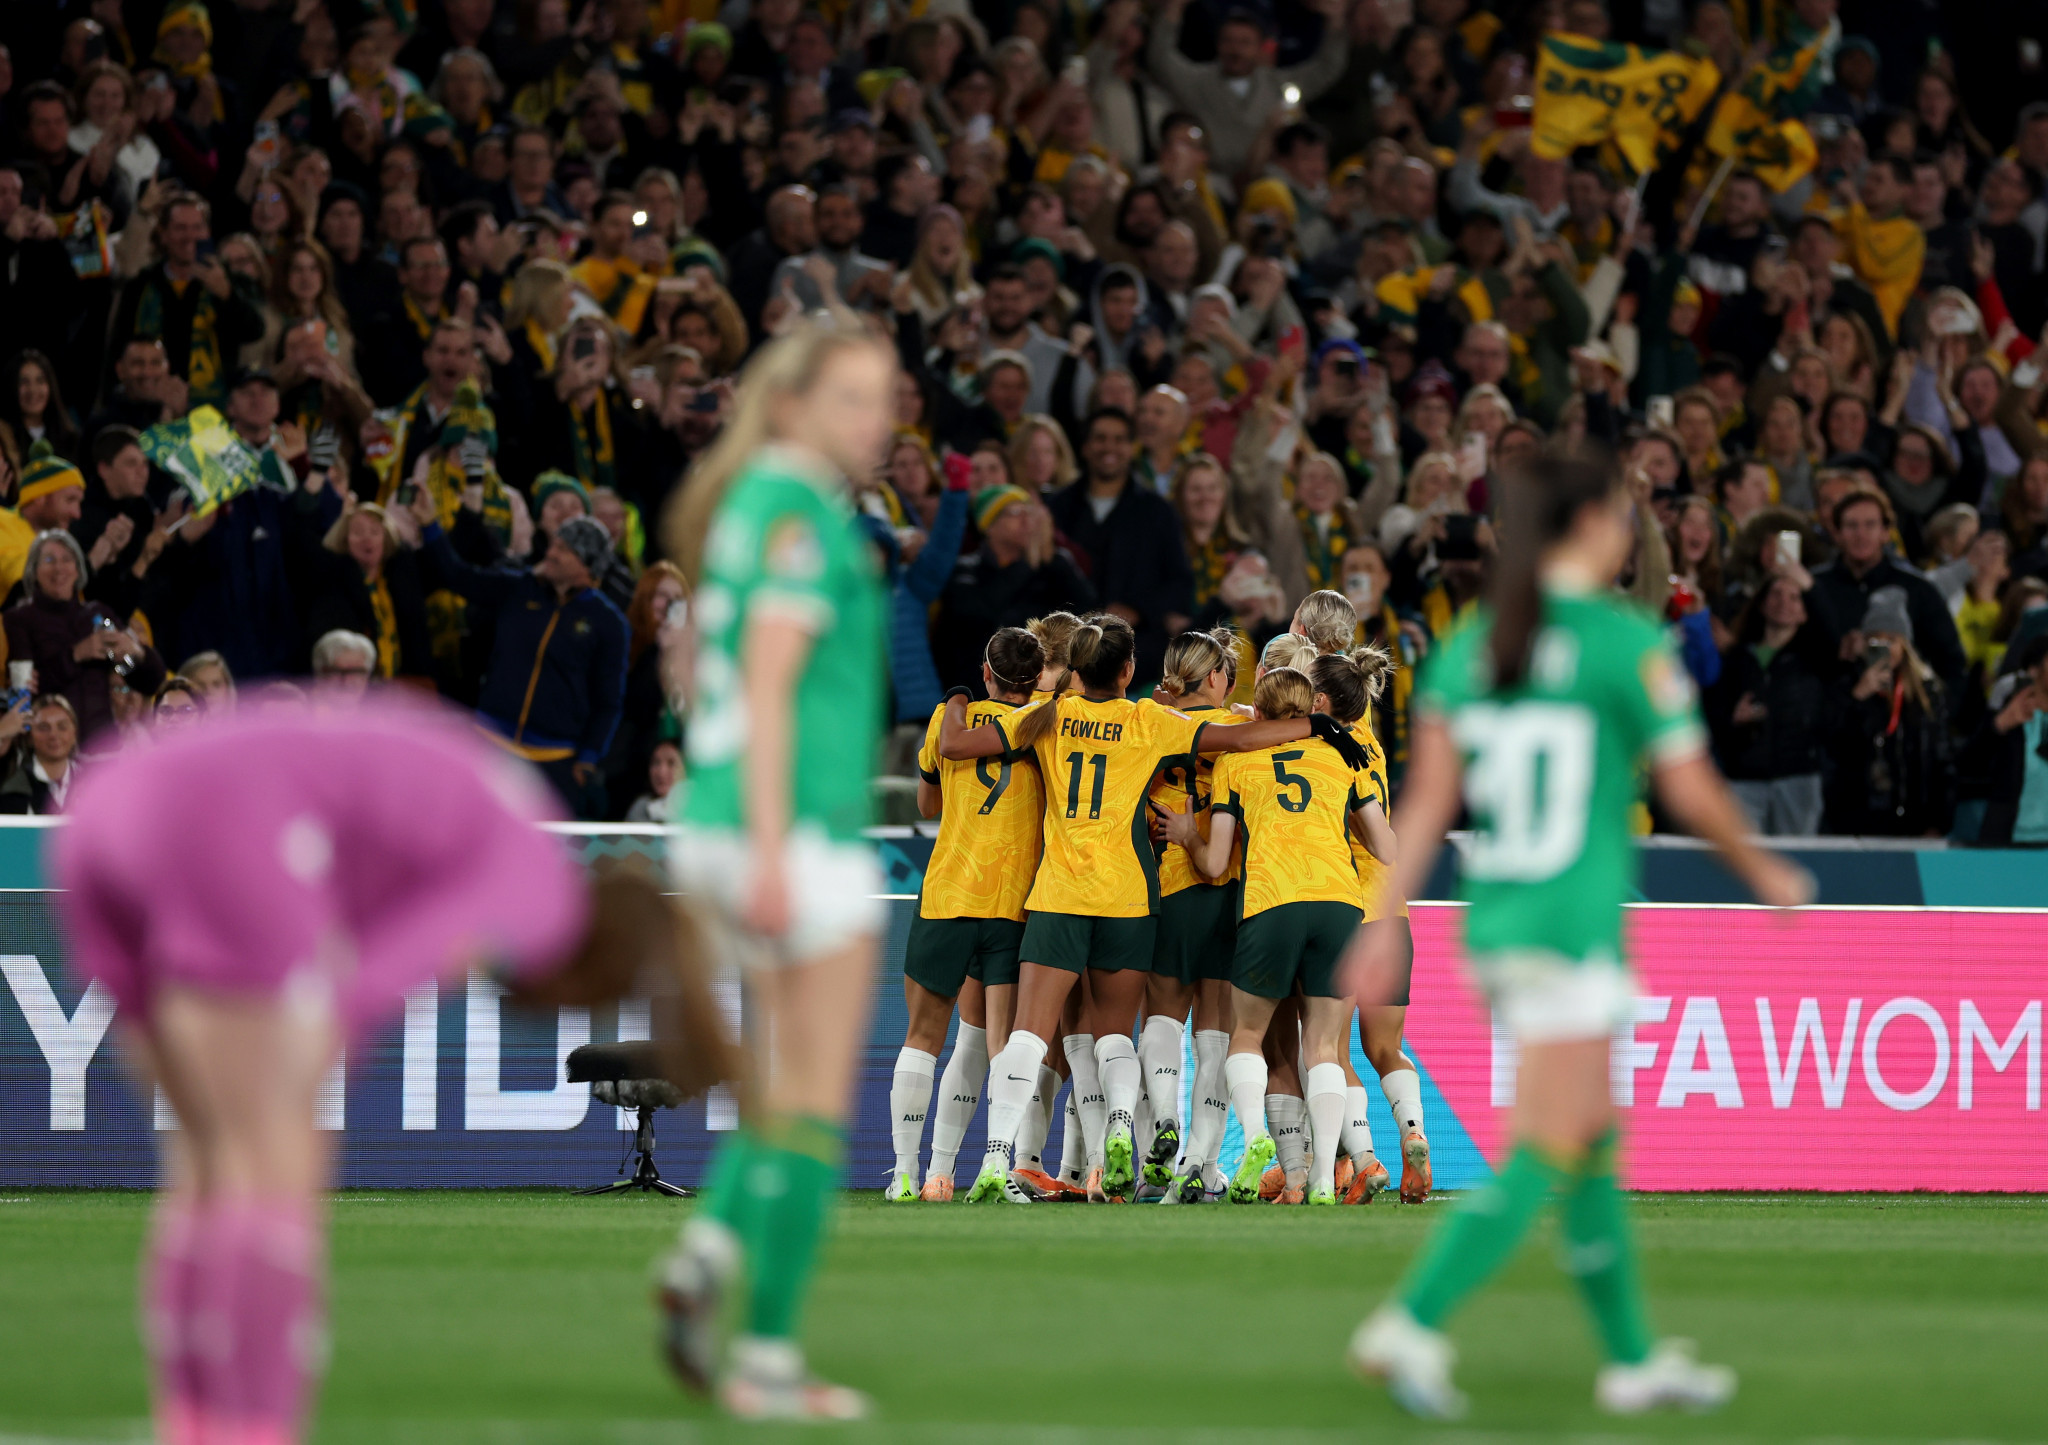 Australia's FIFA Women's World Cup opener against the Republic of Ireland was moved to a bigger venue due to the demand for tickets ©Getty Images